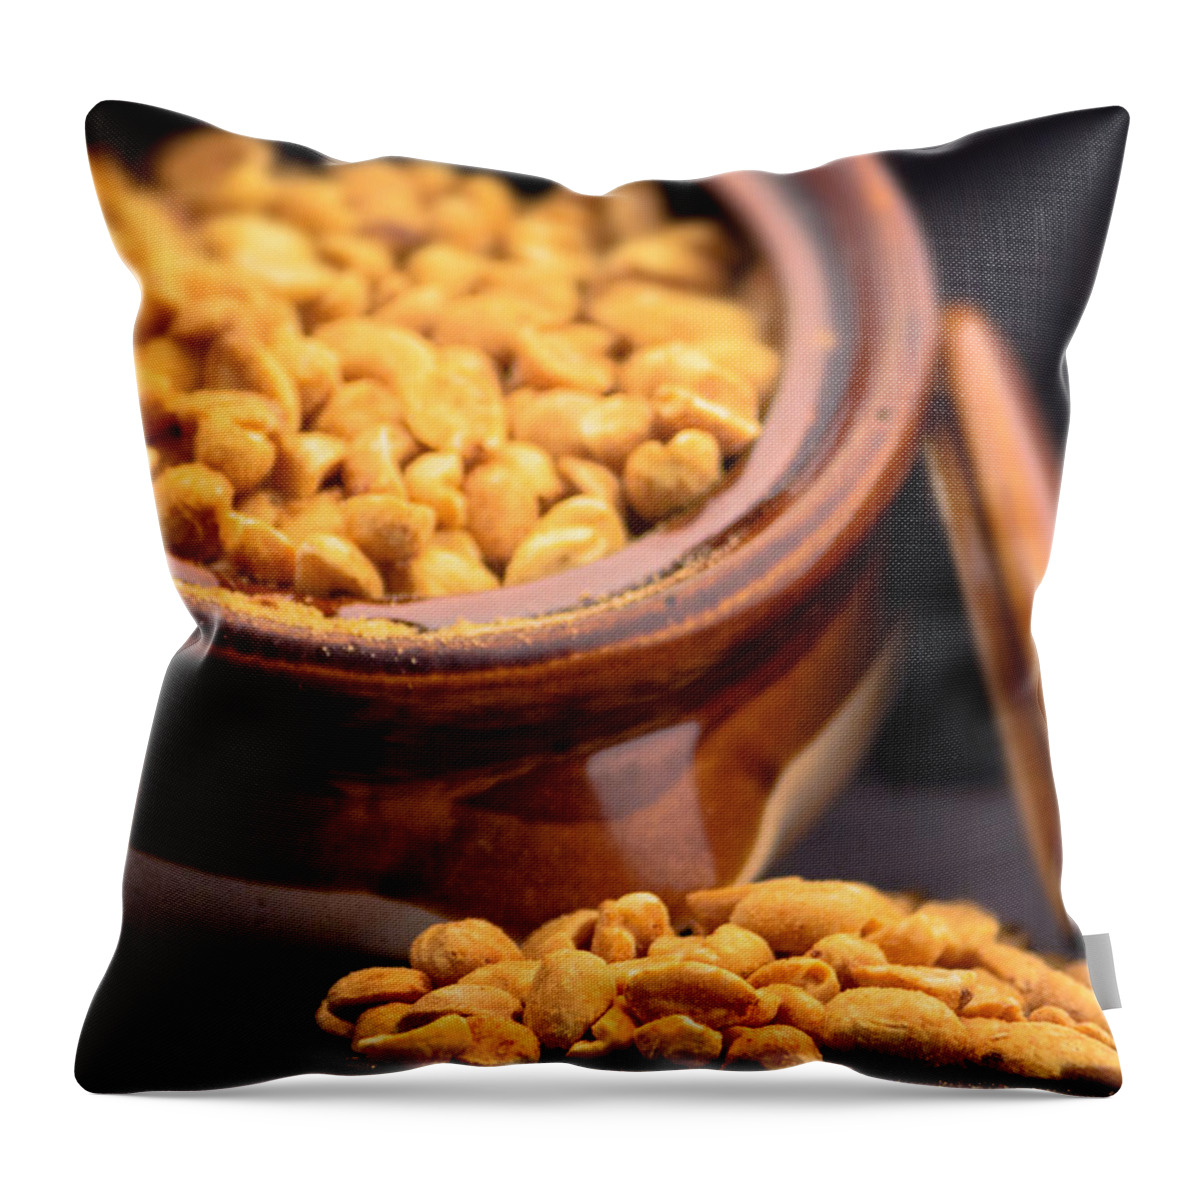 Peanut Throw Pillow featuring the photograph A Jar of Peanuts by Ester McGuire